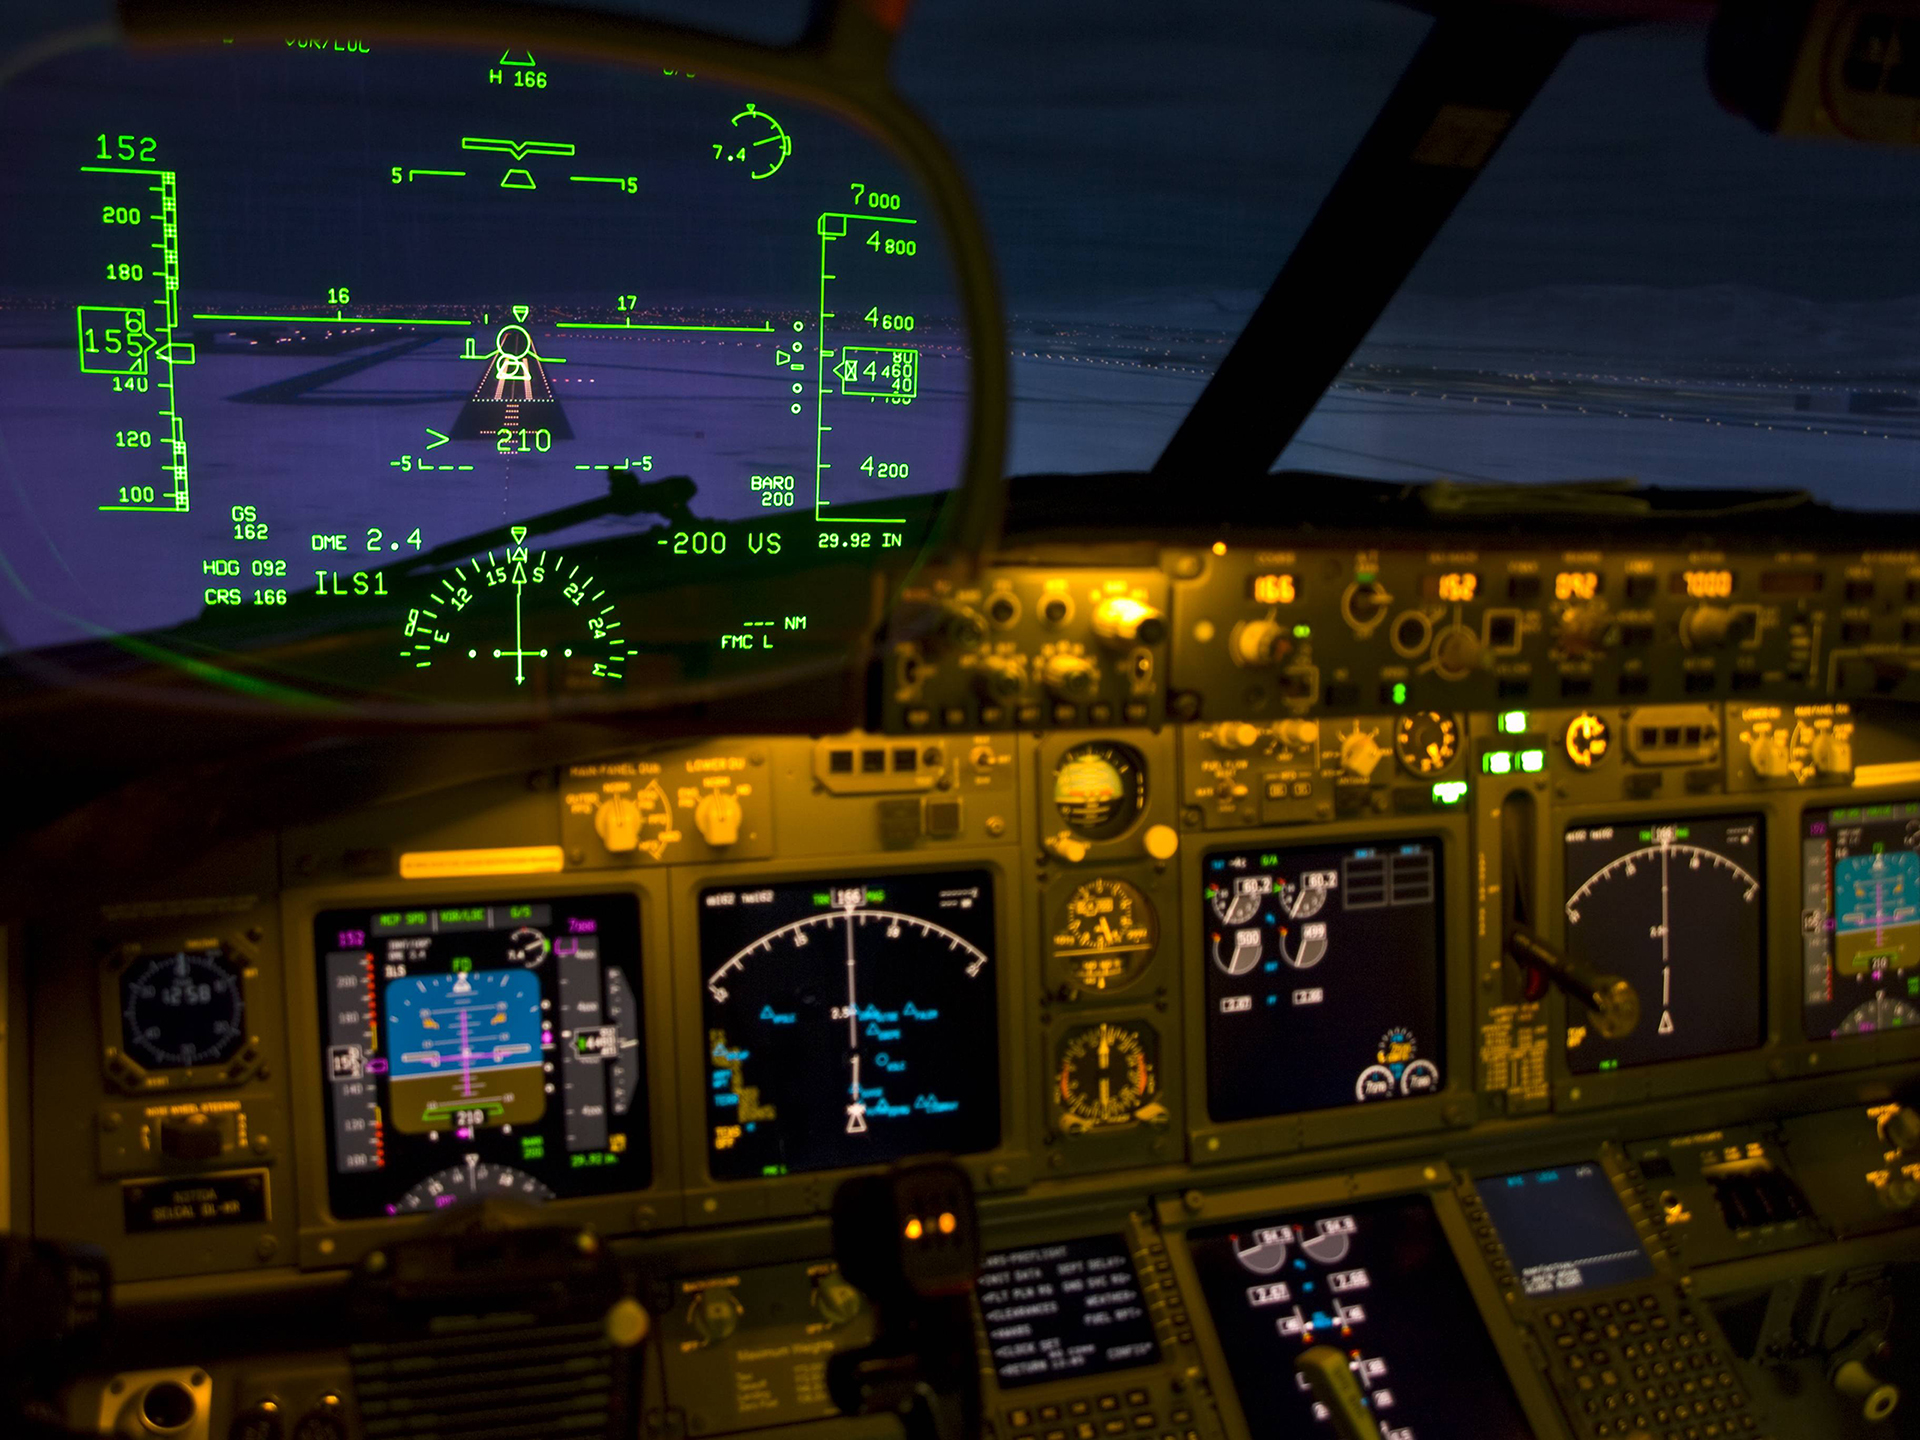 Free download Heads Up Display Cockpit airplane military wallpaper background [1920x1440] for your Desktop, Mobile & Tablet. Explore Airplane Cockpit Desktop Wallpaper. Free Aircraft Wallpaper for Desktop, Aircraft Cockpit